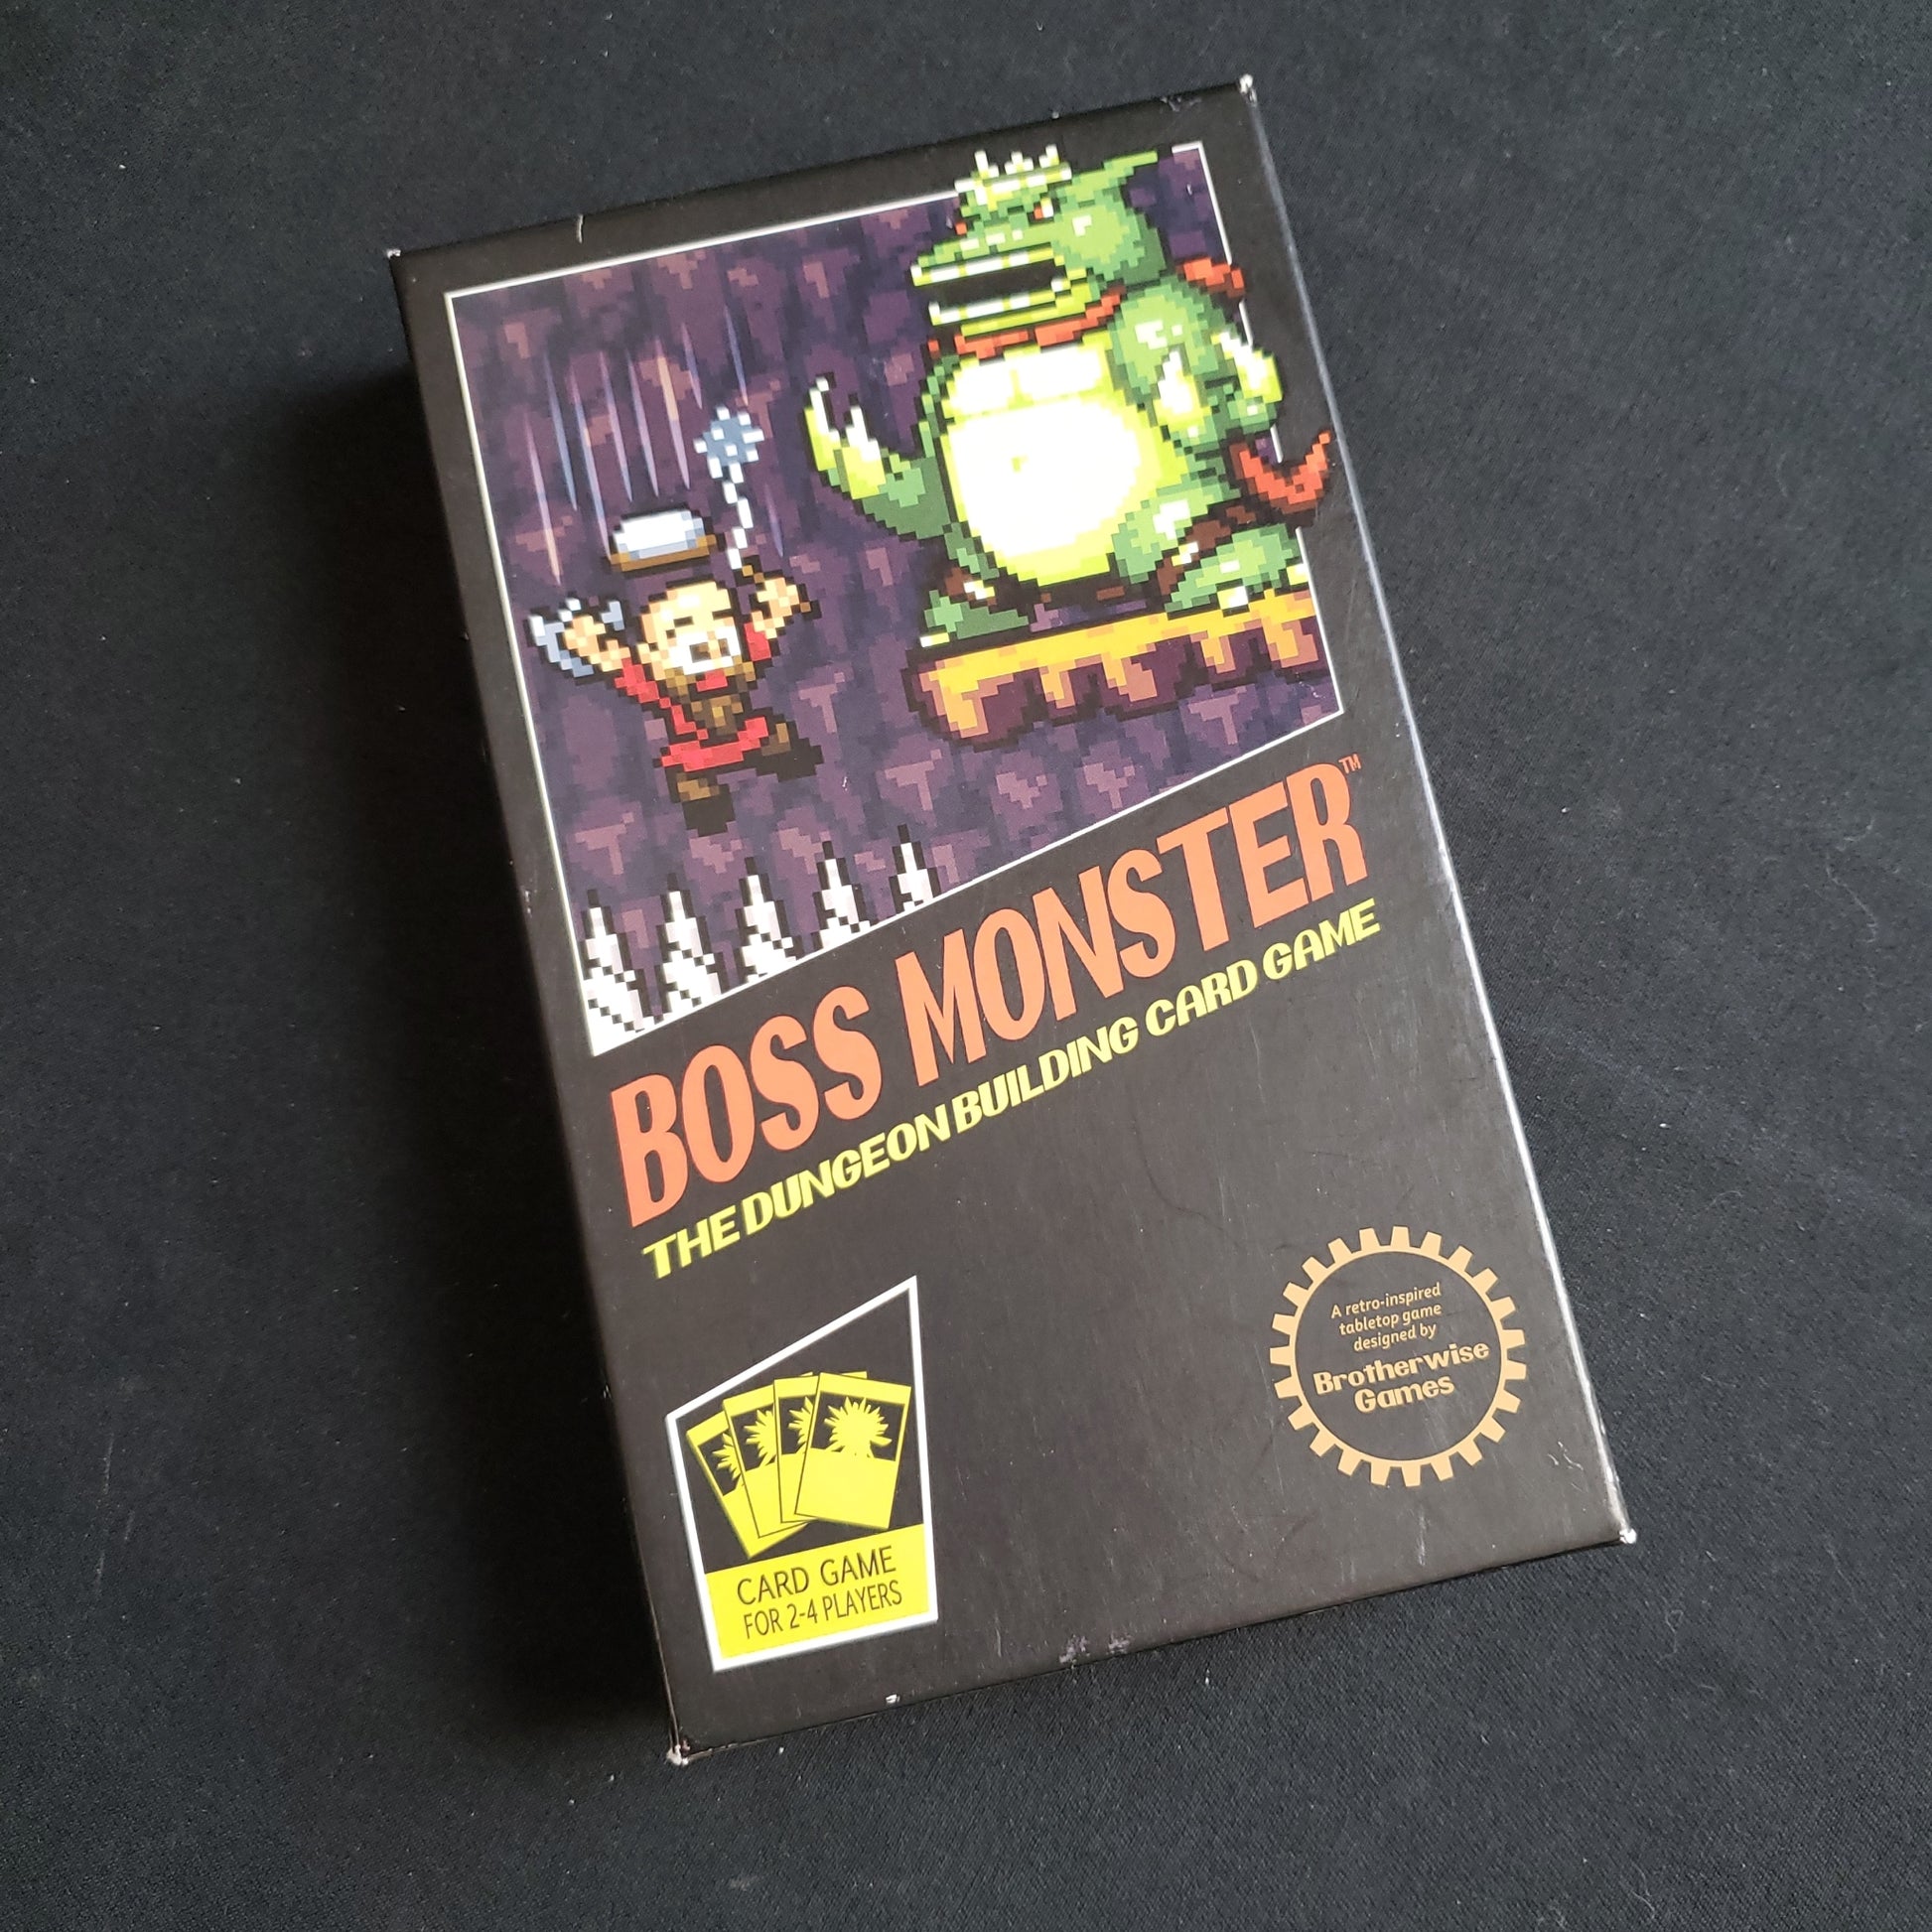 Image shows the front cover of the box of the Boss Monster card game